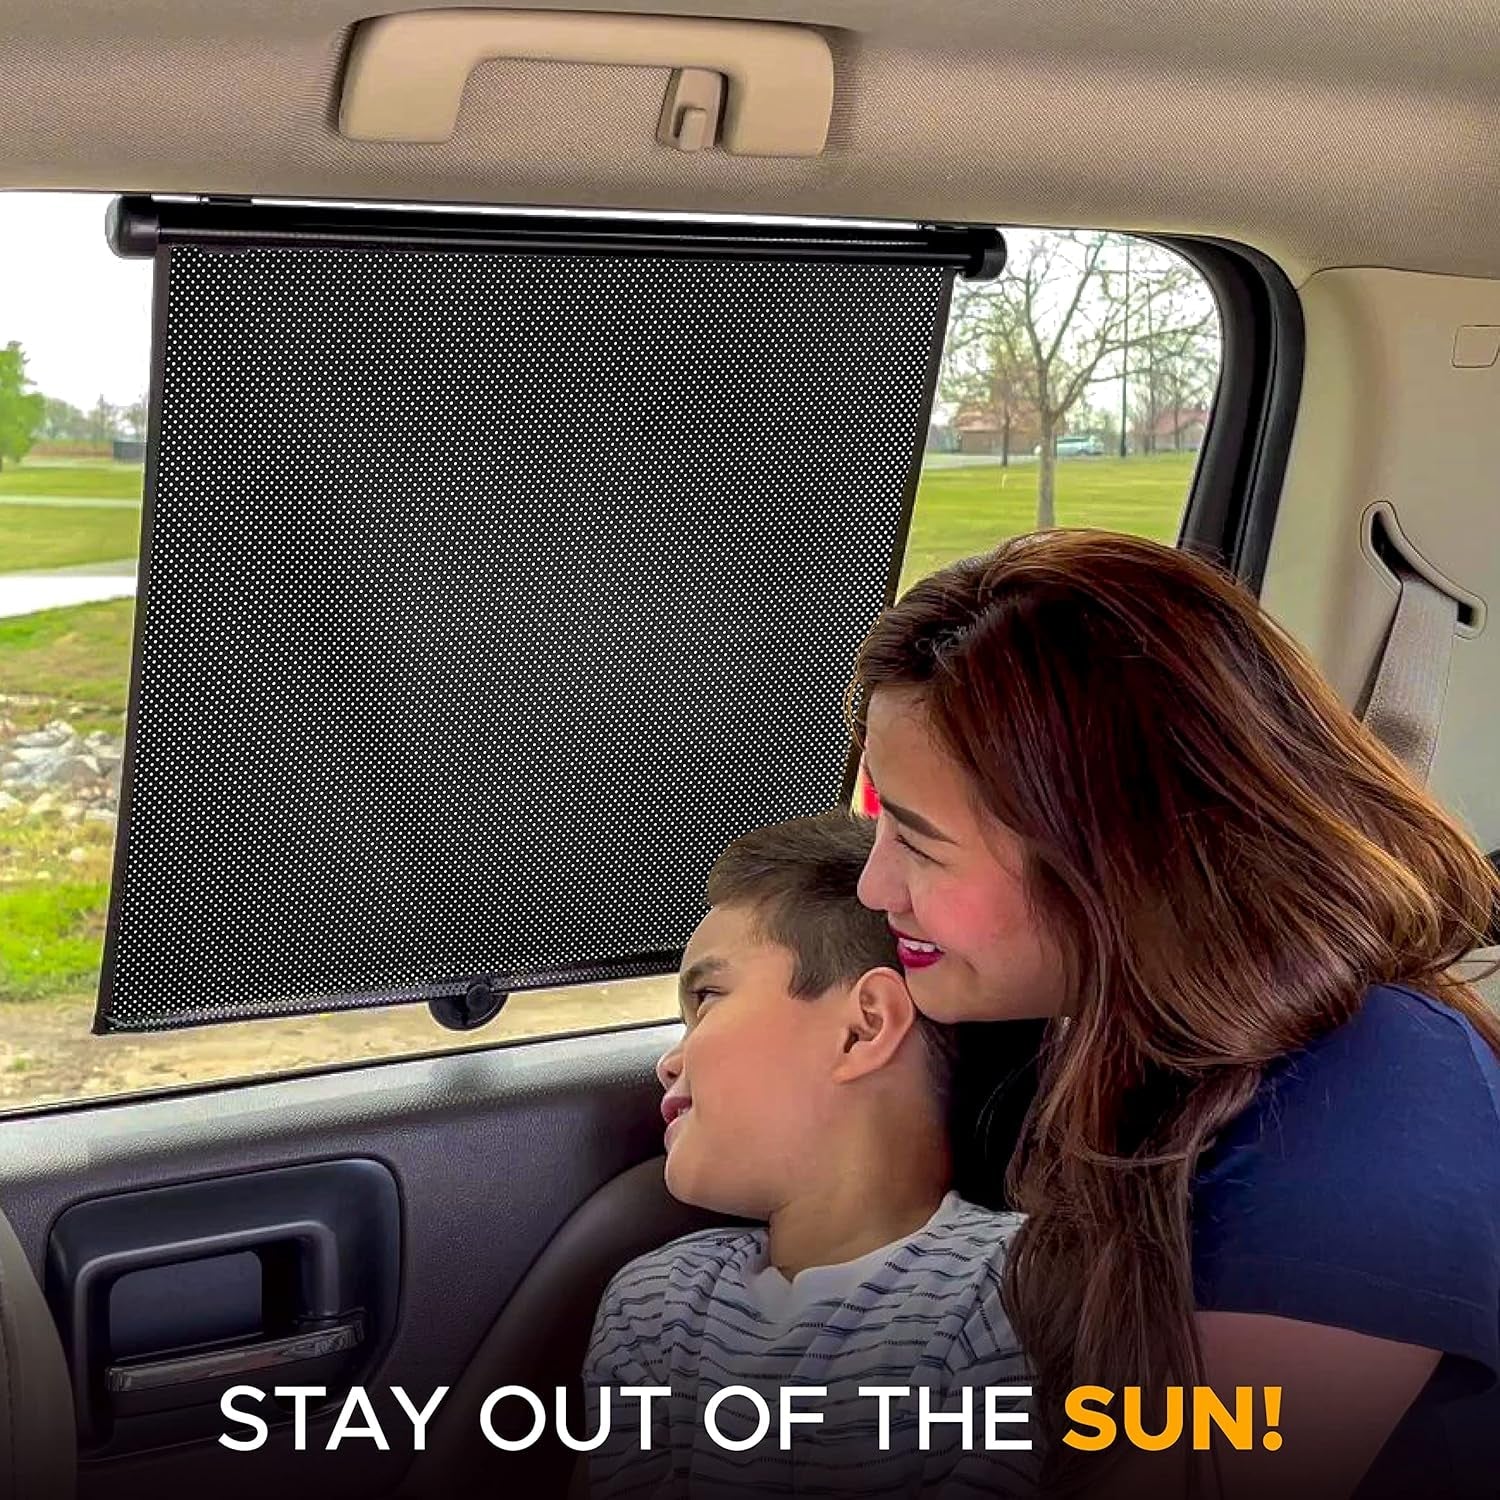 Econour Car Side Window Sun Shade (2 Pack) | Retractable Car Roller Sunshade for Kids | Baby Car Window Shades for UV and Sun Glare Protection | Baby Car Travel Accessories (15"X17")